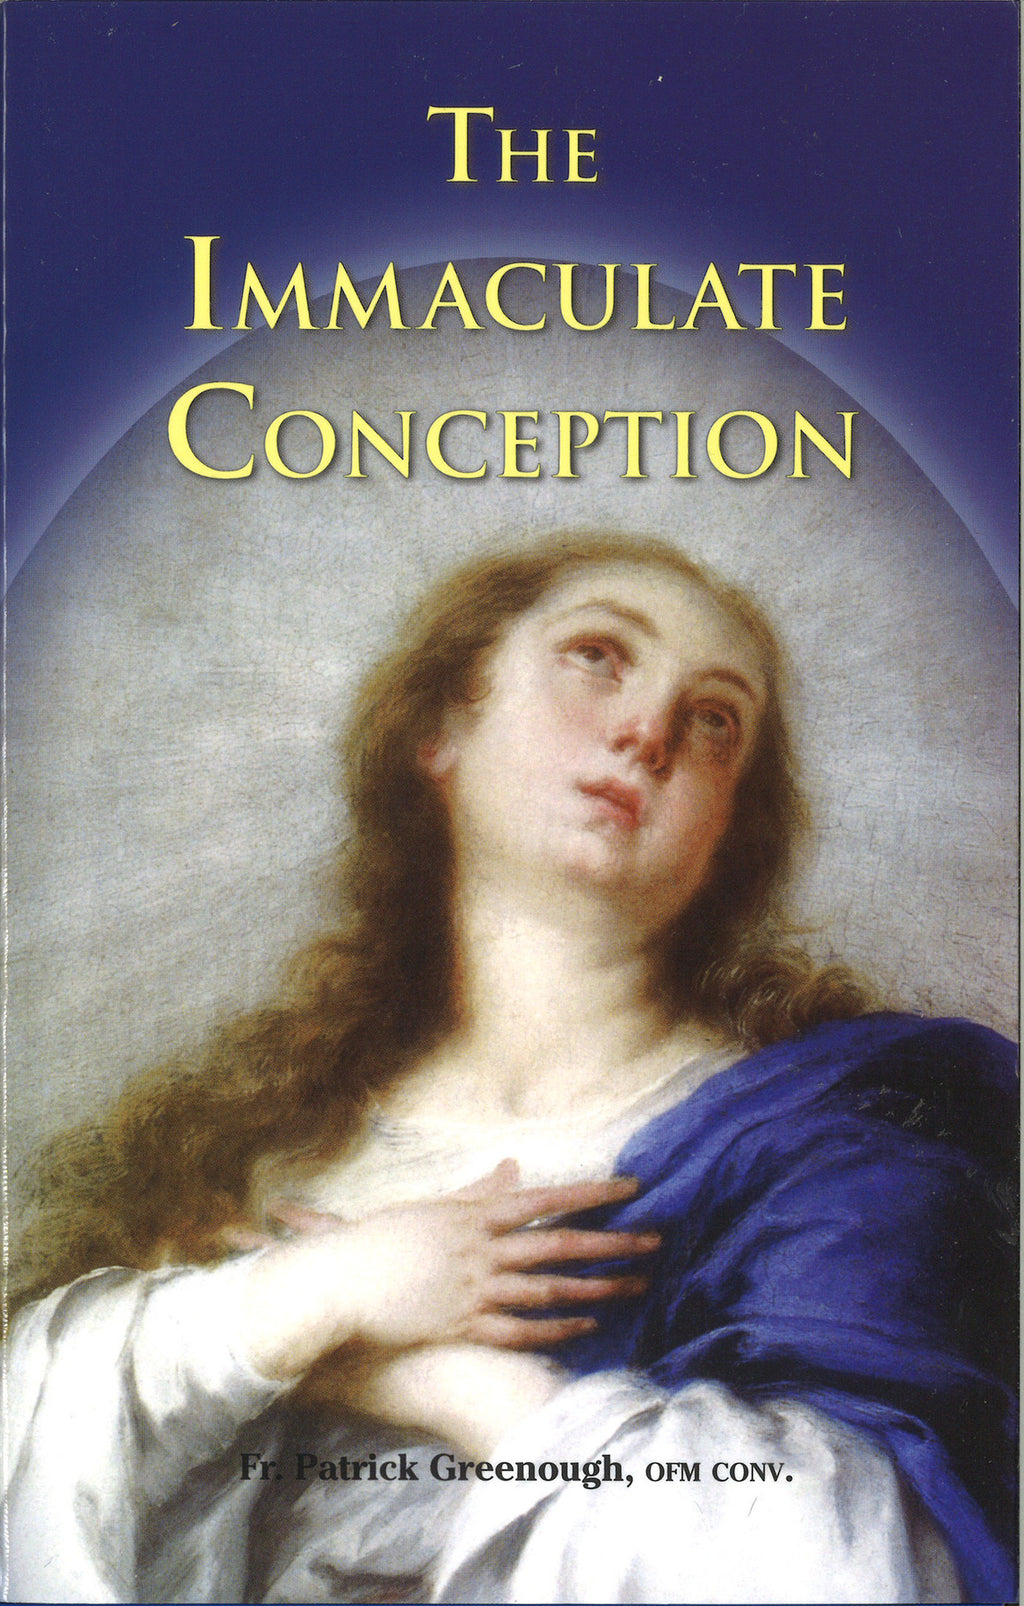 THE IMMACULATE CONCEPTION